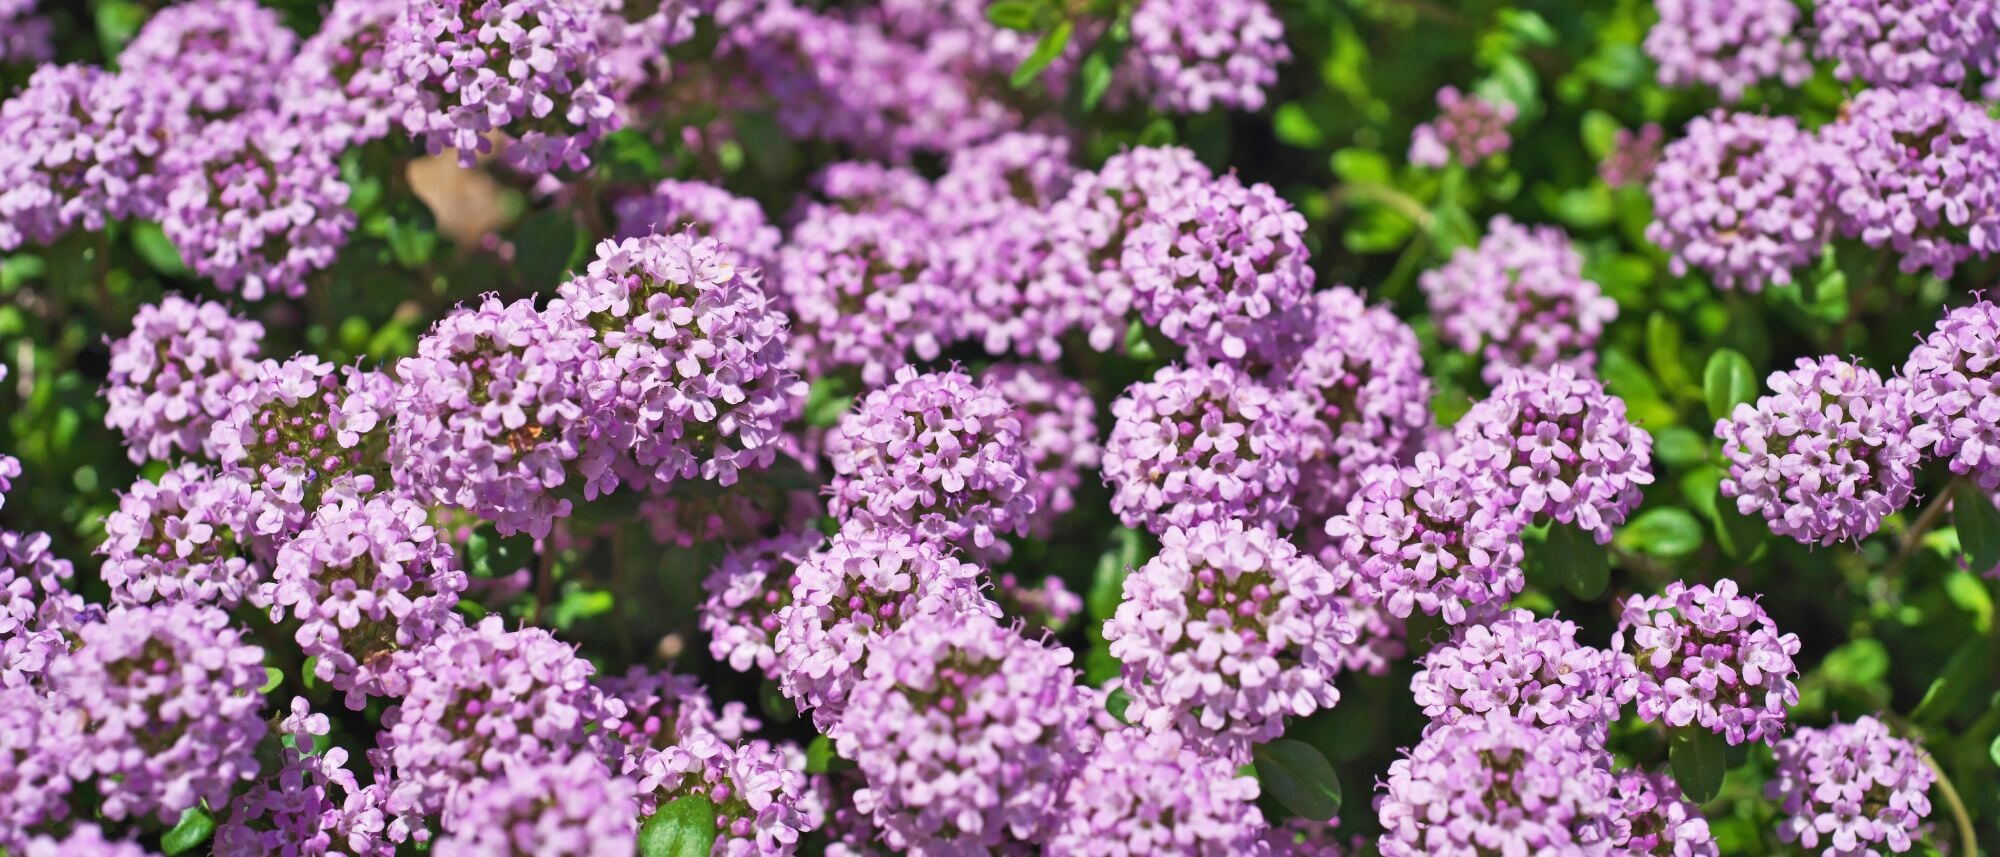 Low growing groundcover creeping thyme flower seeds to grow